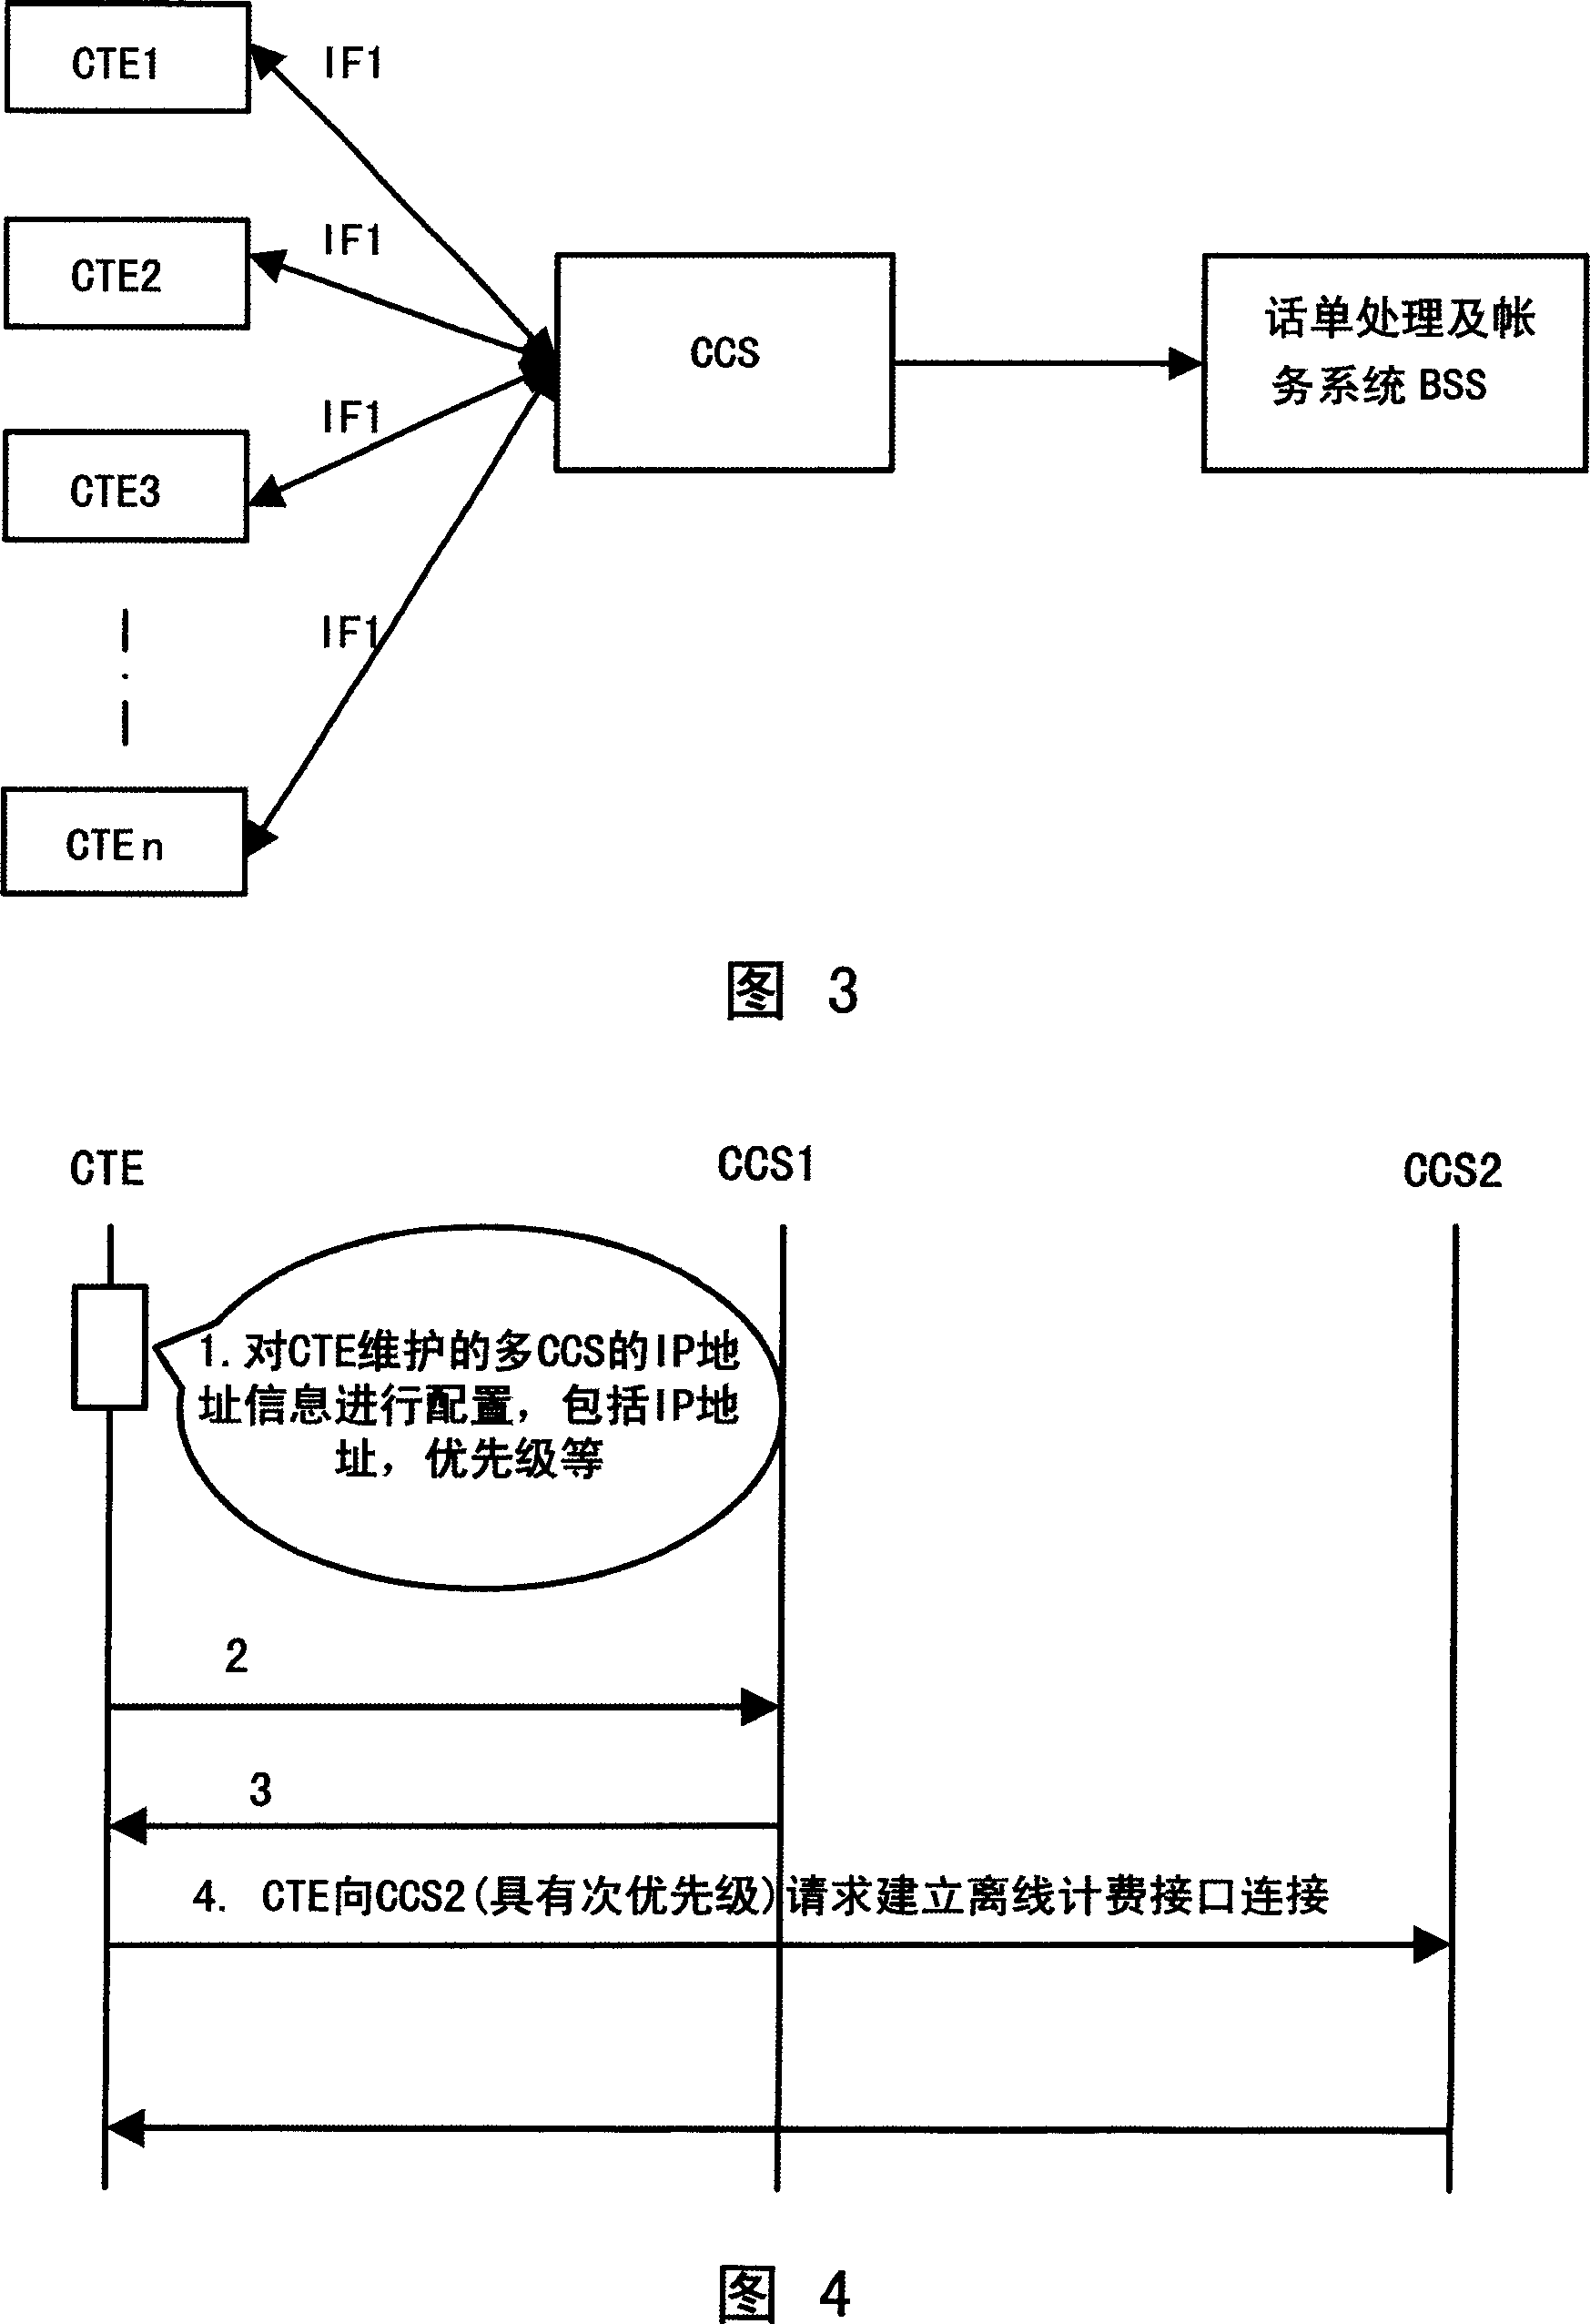 Off-line charging system and method